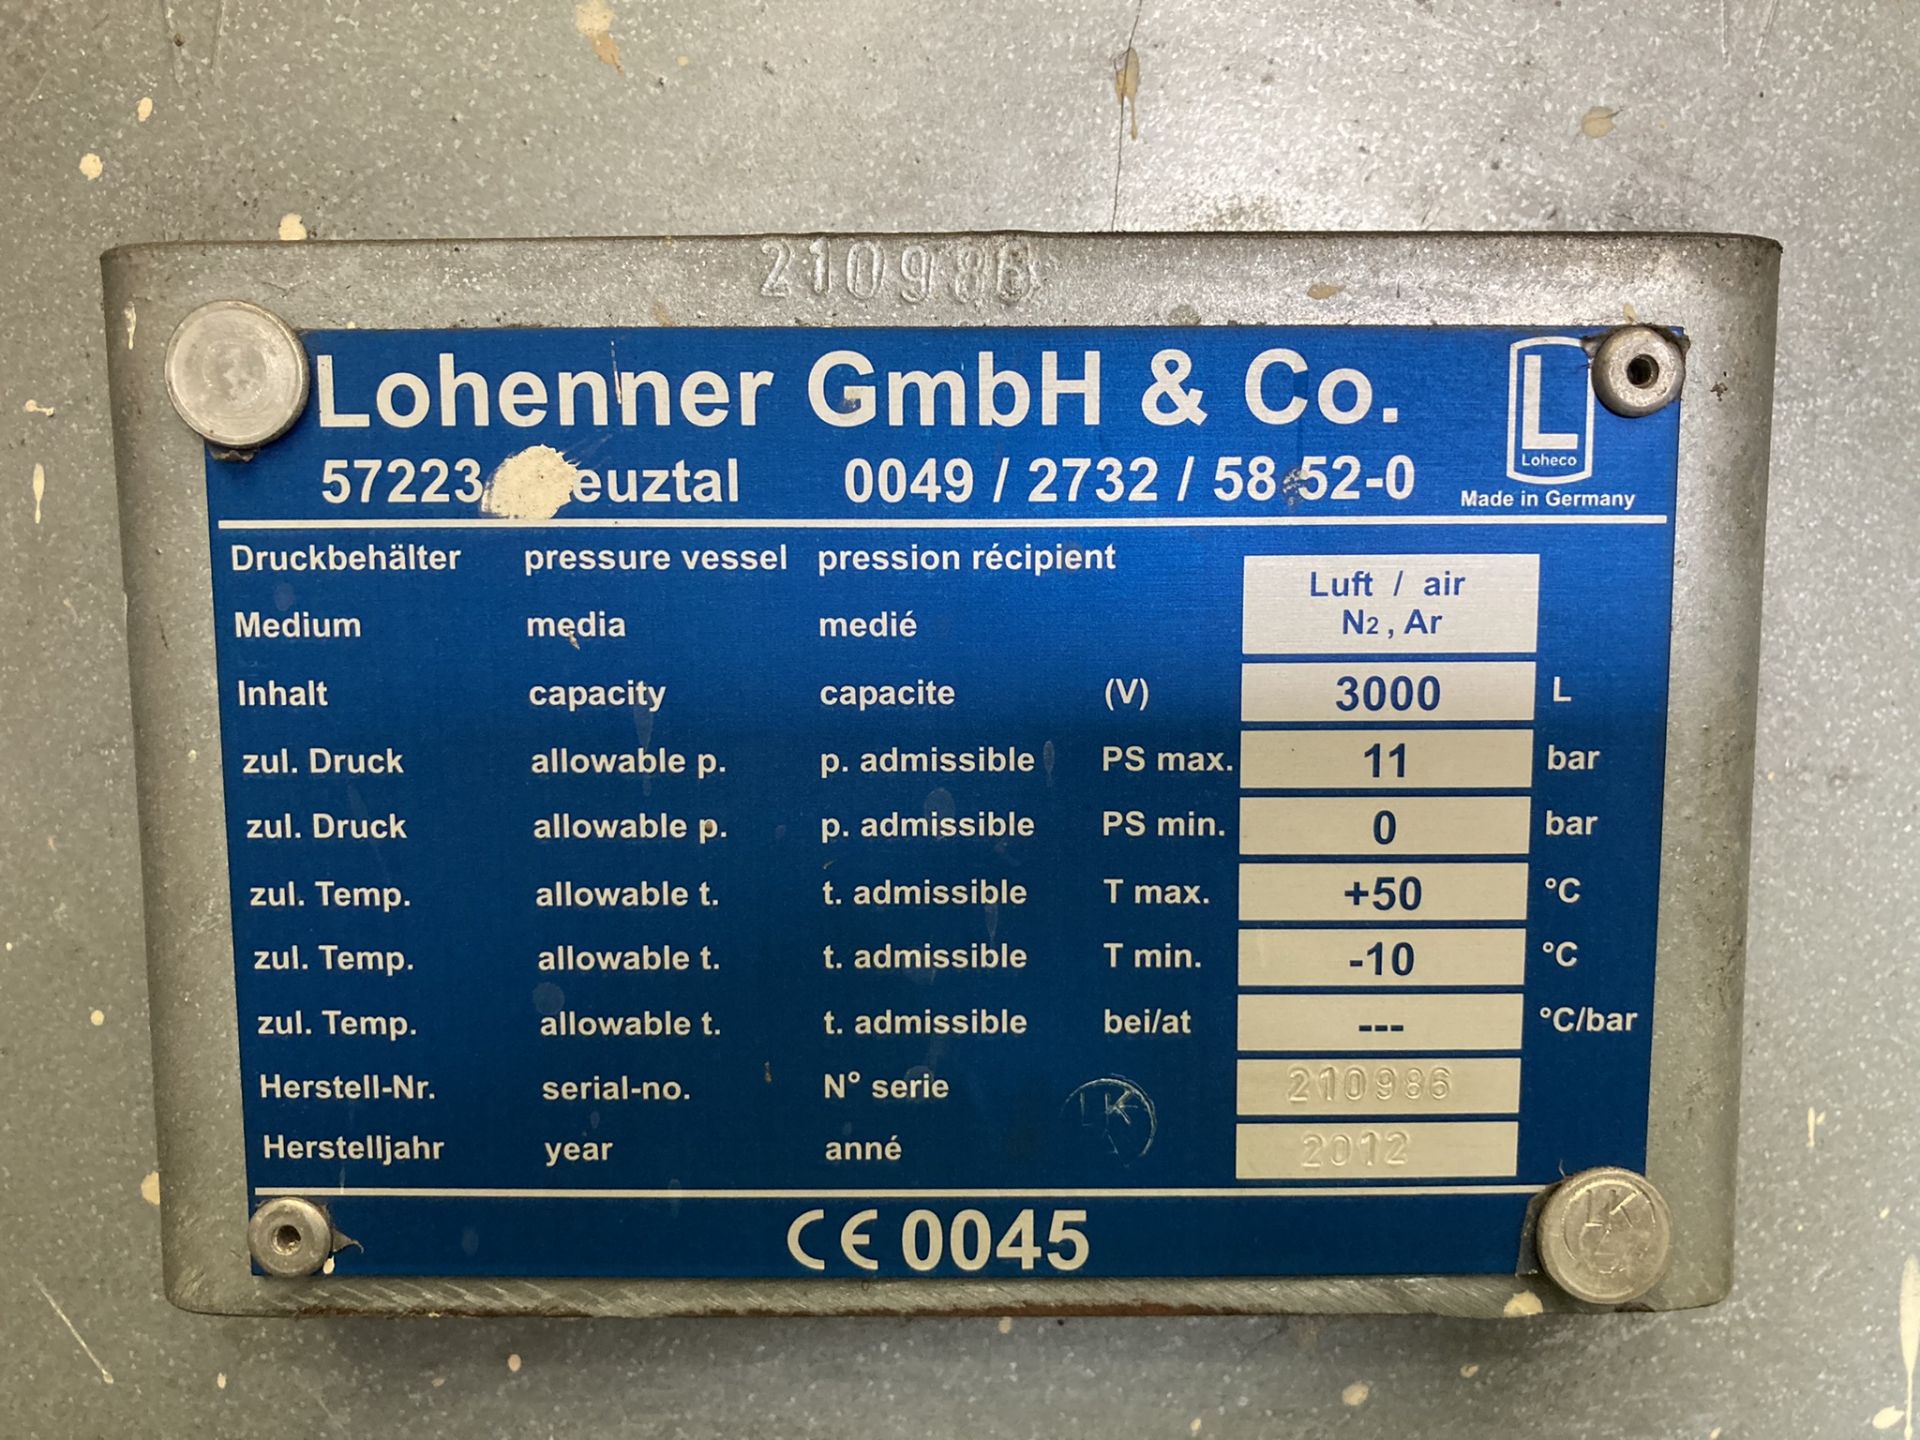 1 Atlas Copco, Lohenner, 3,000 litre welded air receiver , Serial Number: 210986, Year of Manufactu - Image 2 of 2